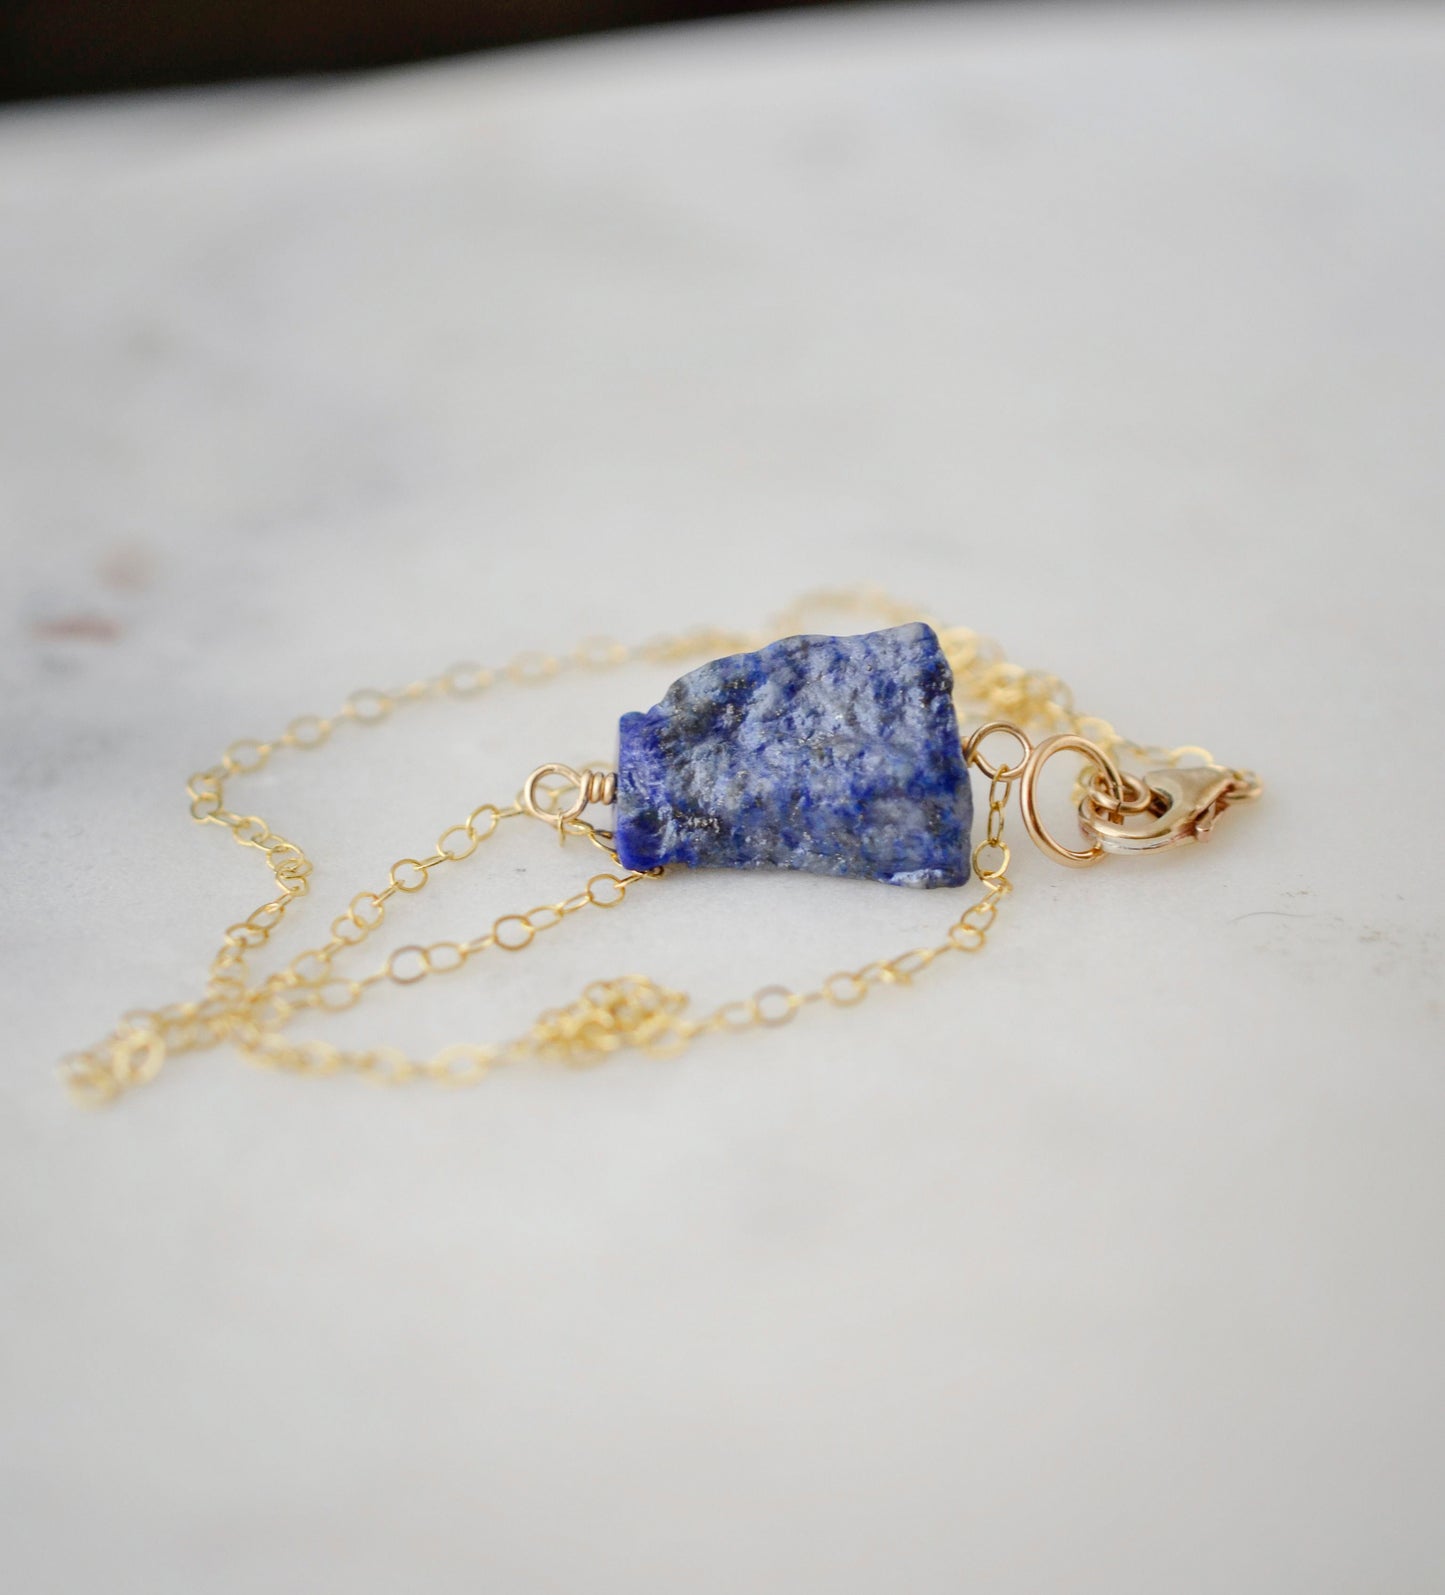 Raw blue lapis lazuli stone suspended from a gold chain.